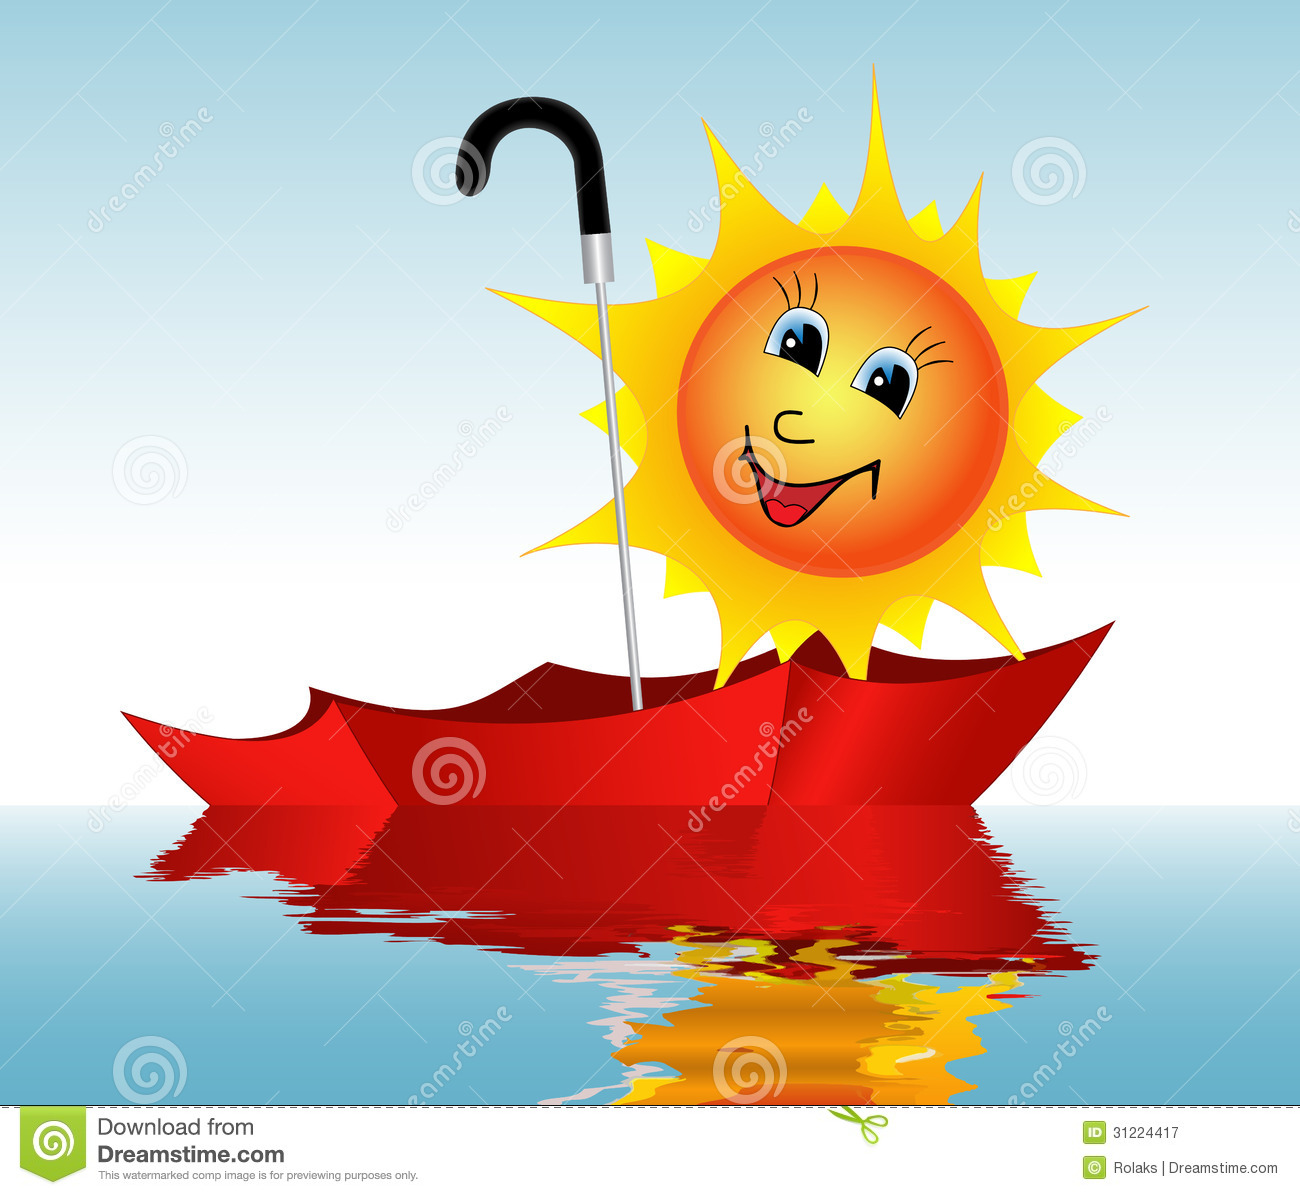 Sun In An Umbrella Royalty Free Stock Photography   Image  31224417